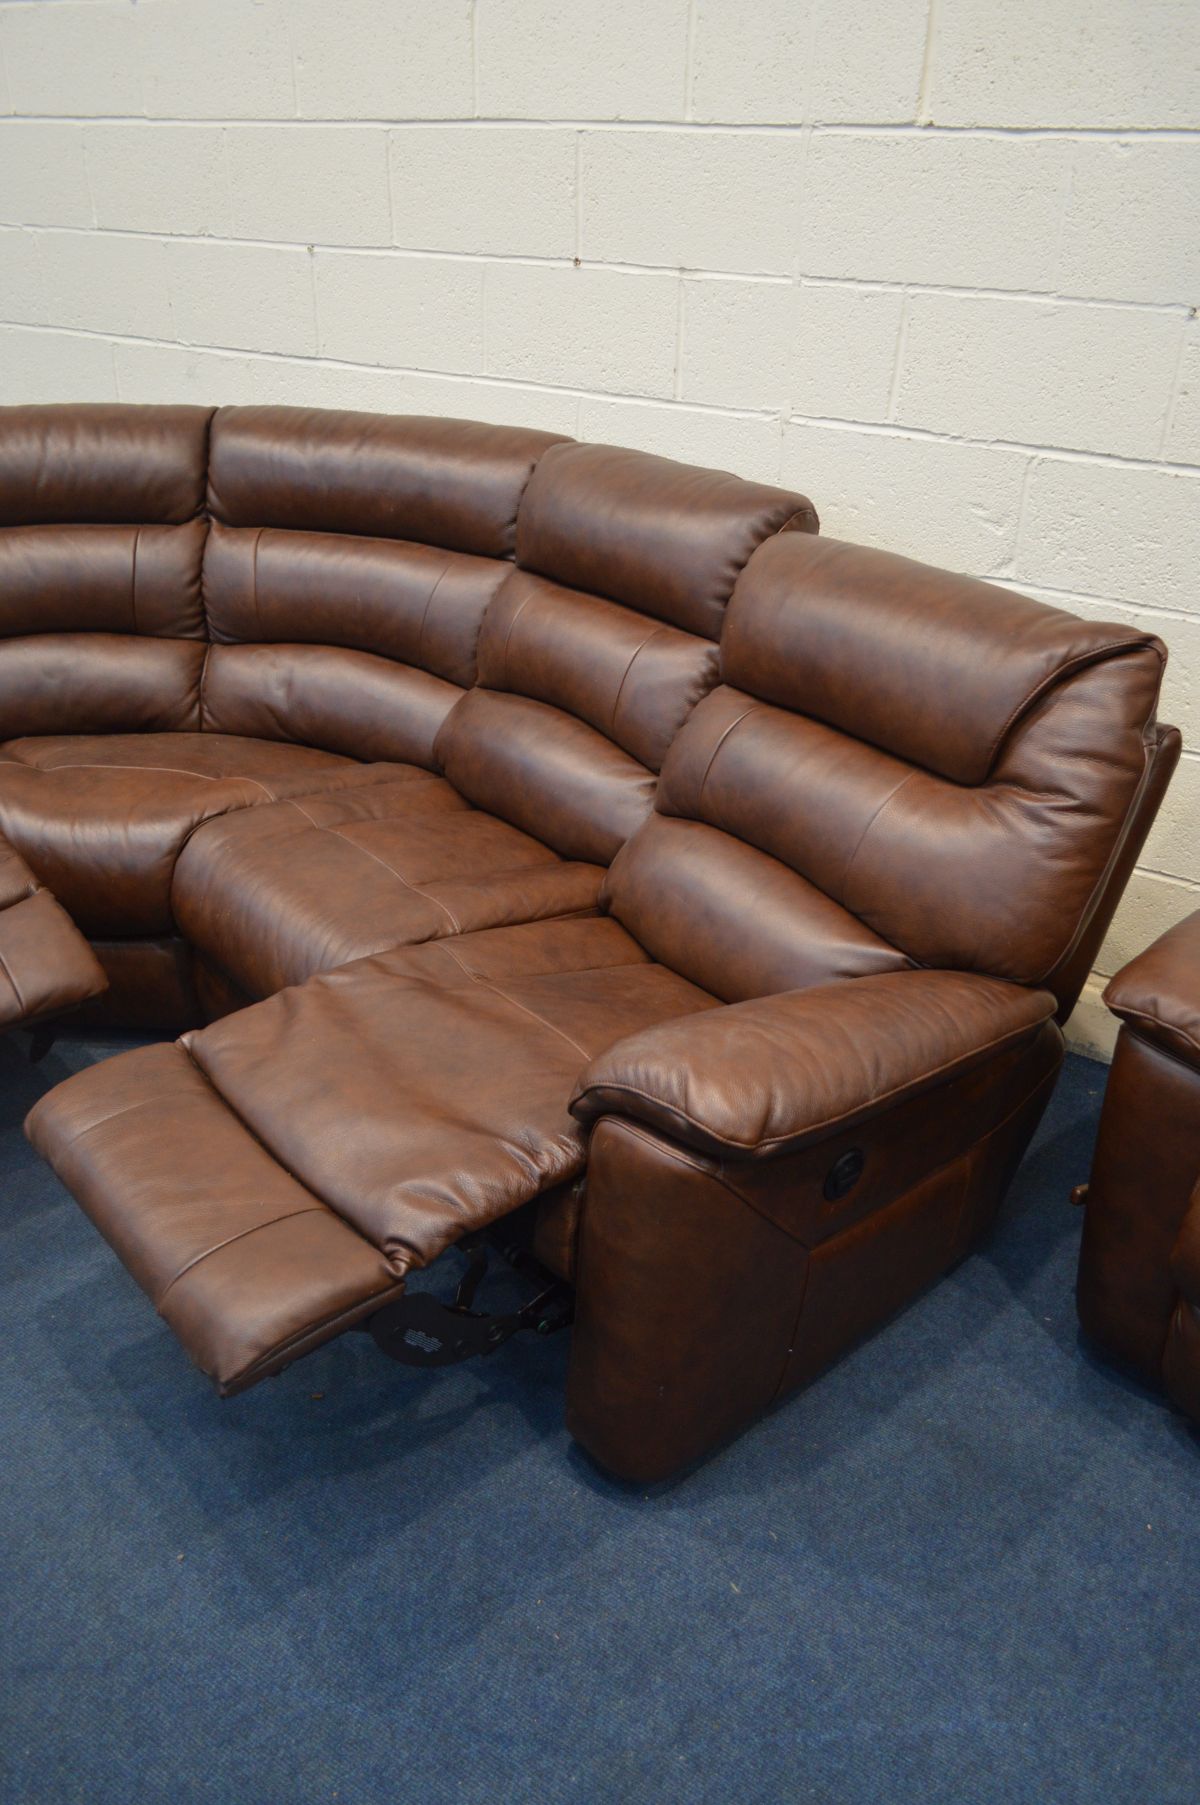 A LA-Z- BOY BROWN LEATHER CORNER SOFA, with electric recliners to each ends, length 250cm x depth - Image 3 of 6